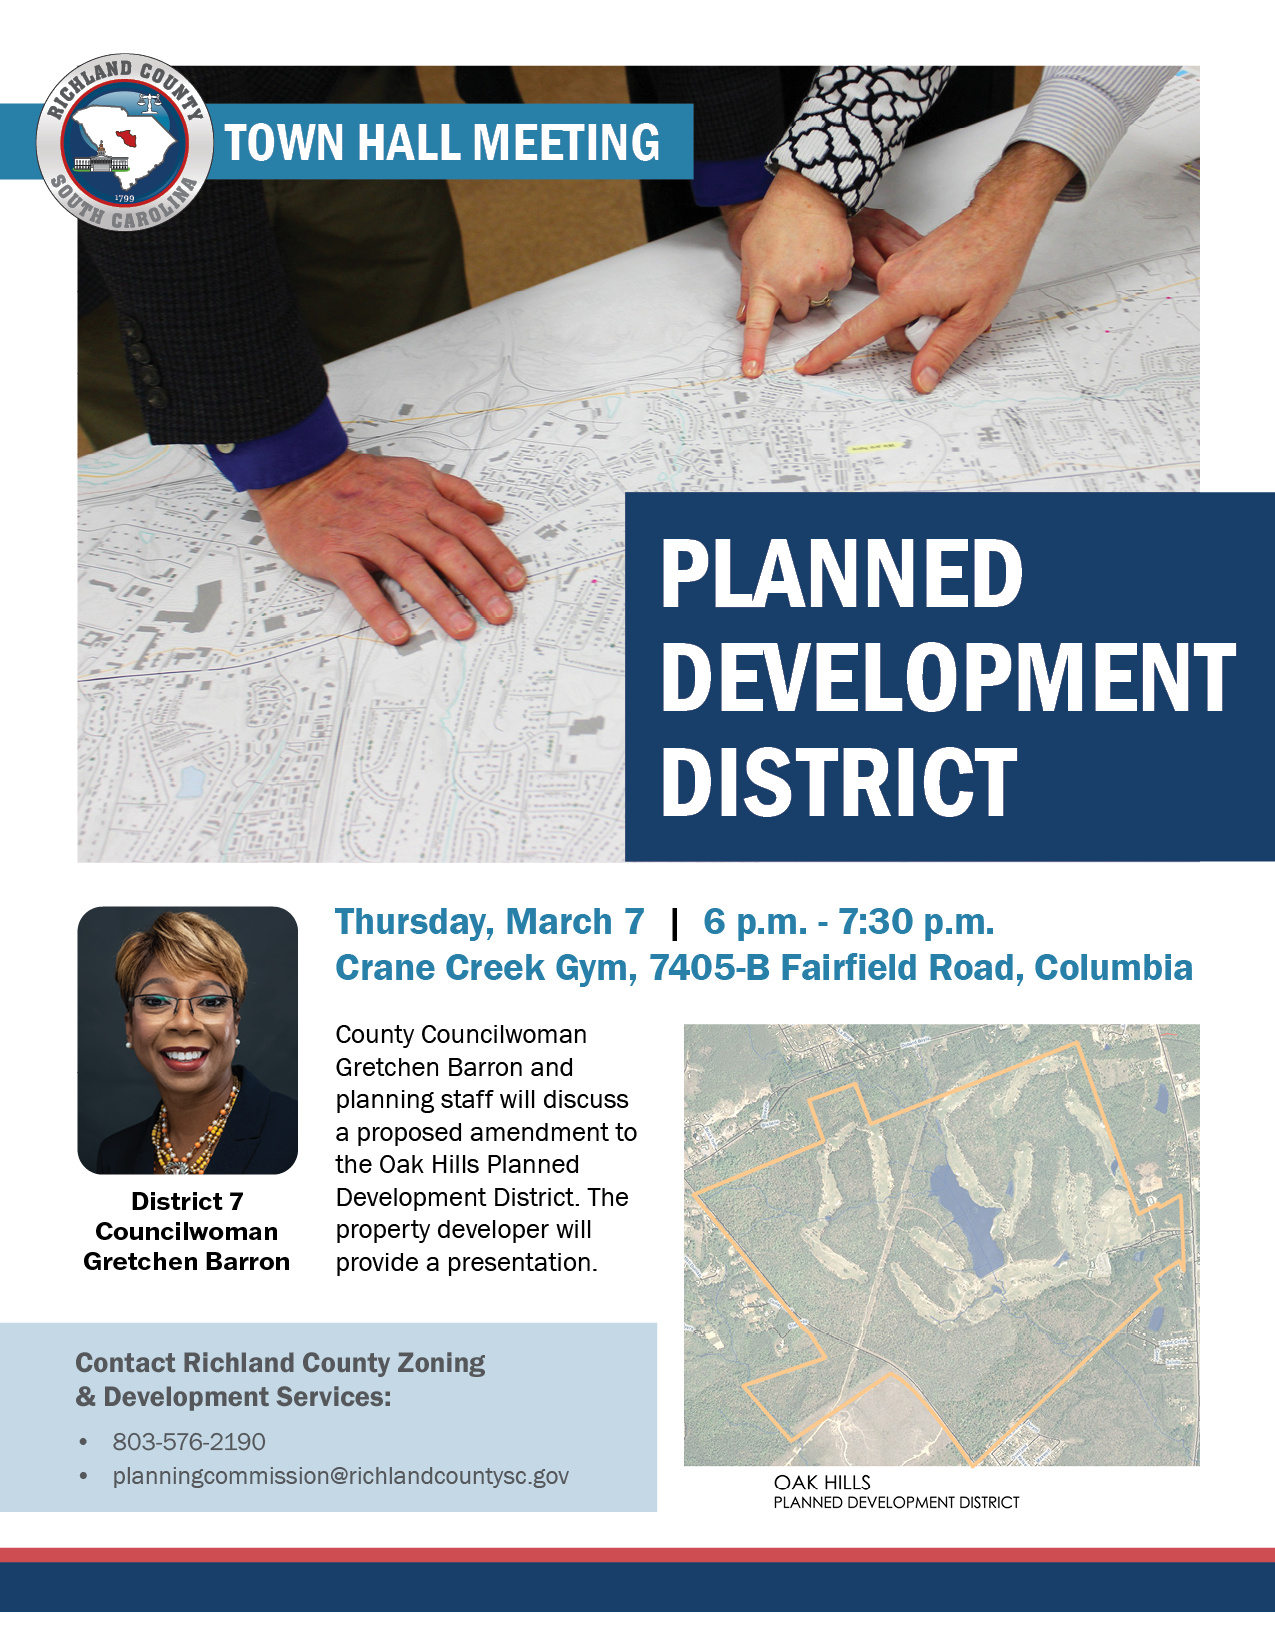 District 7 Town Hall: Planned Development District